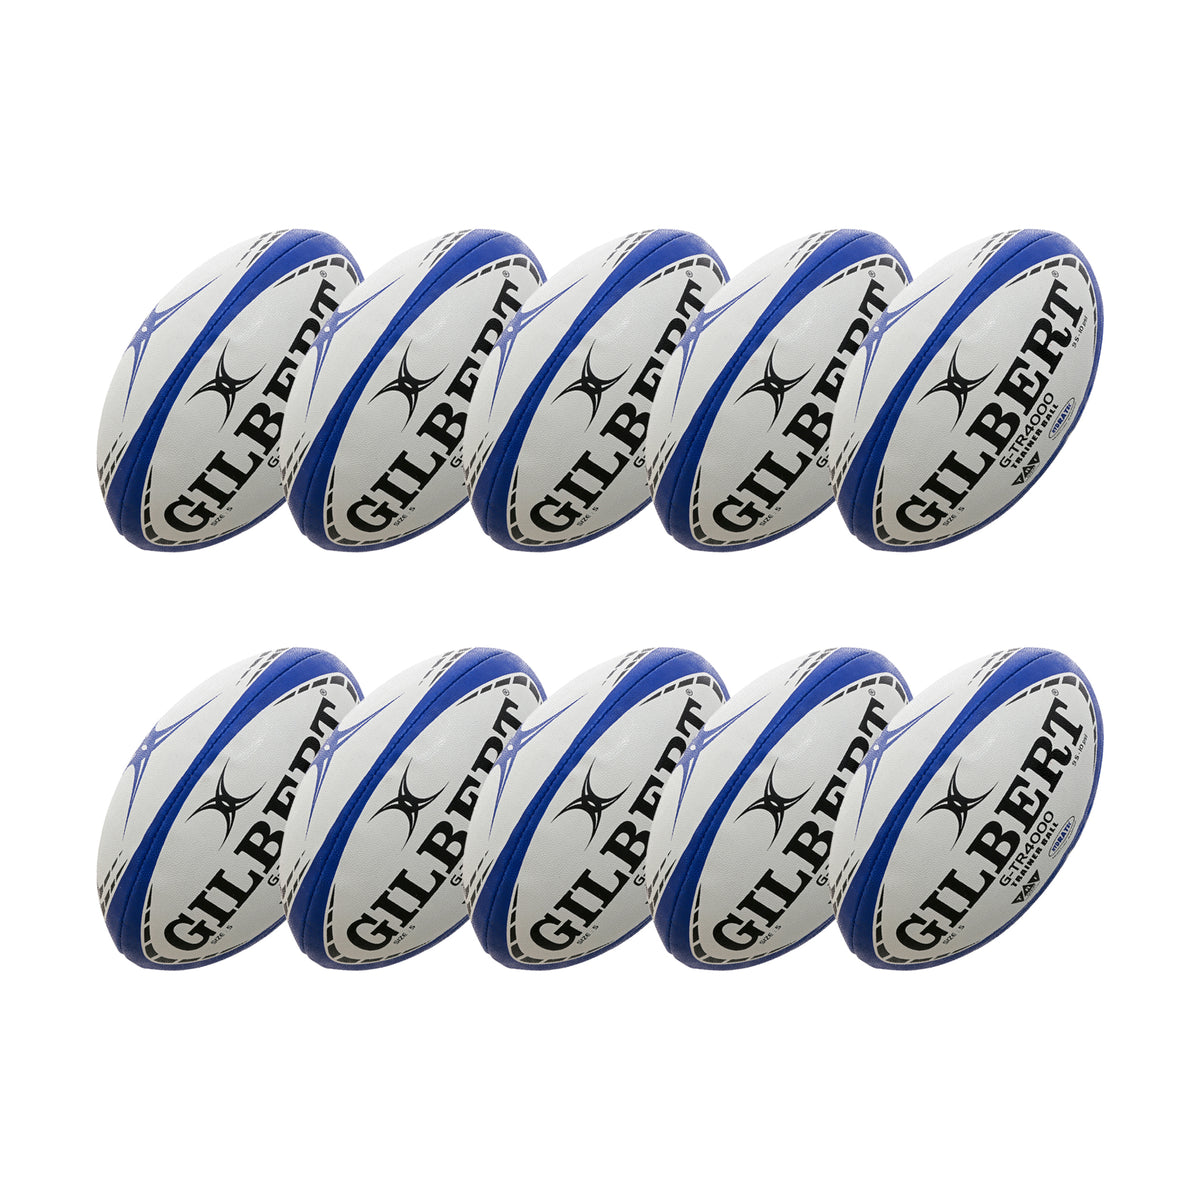 Gilbert G-TR4000 Training Rugby Ball - Size 5 (Pack 10)